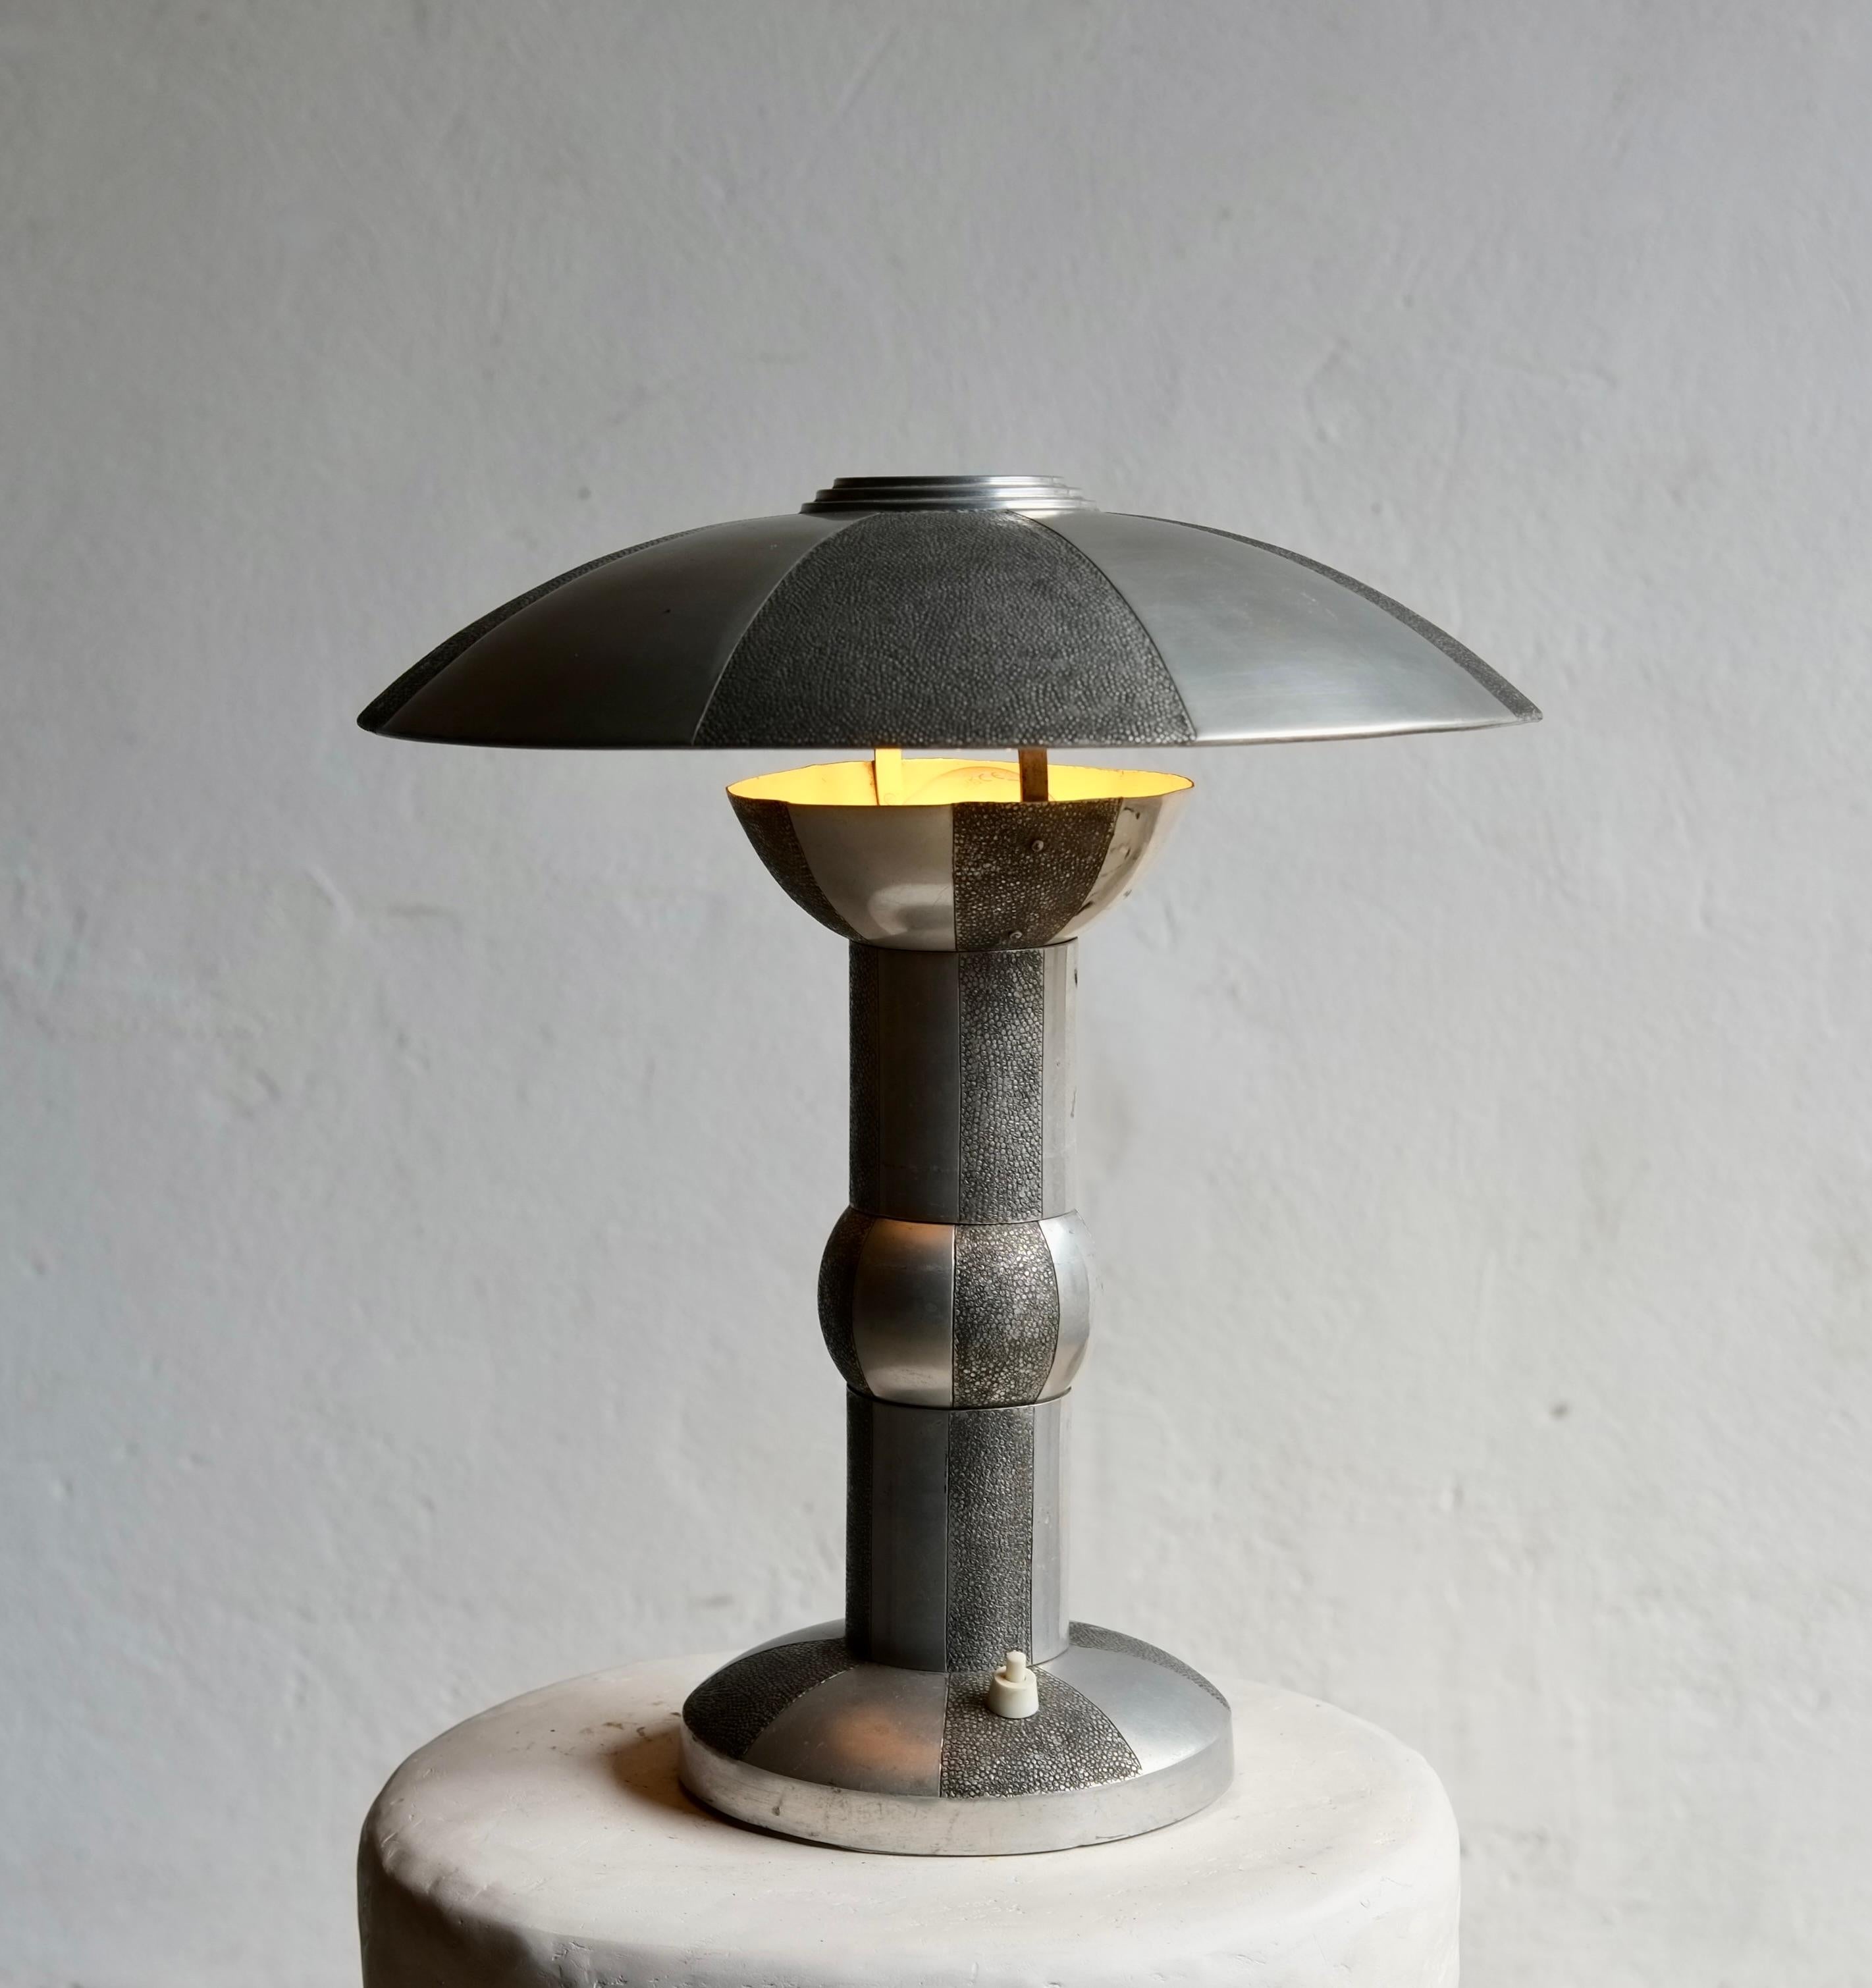 An original  1930's Art Deco aluminium metal lamp with a shagreen effect. 

Some scratching to the metal. 